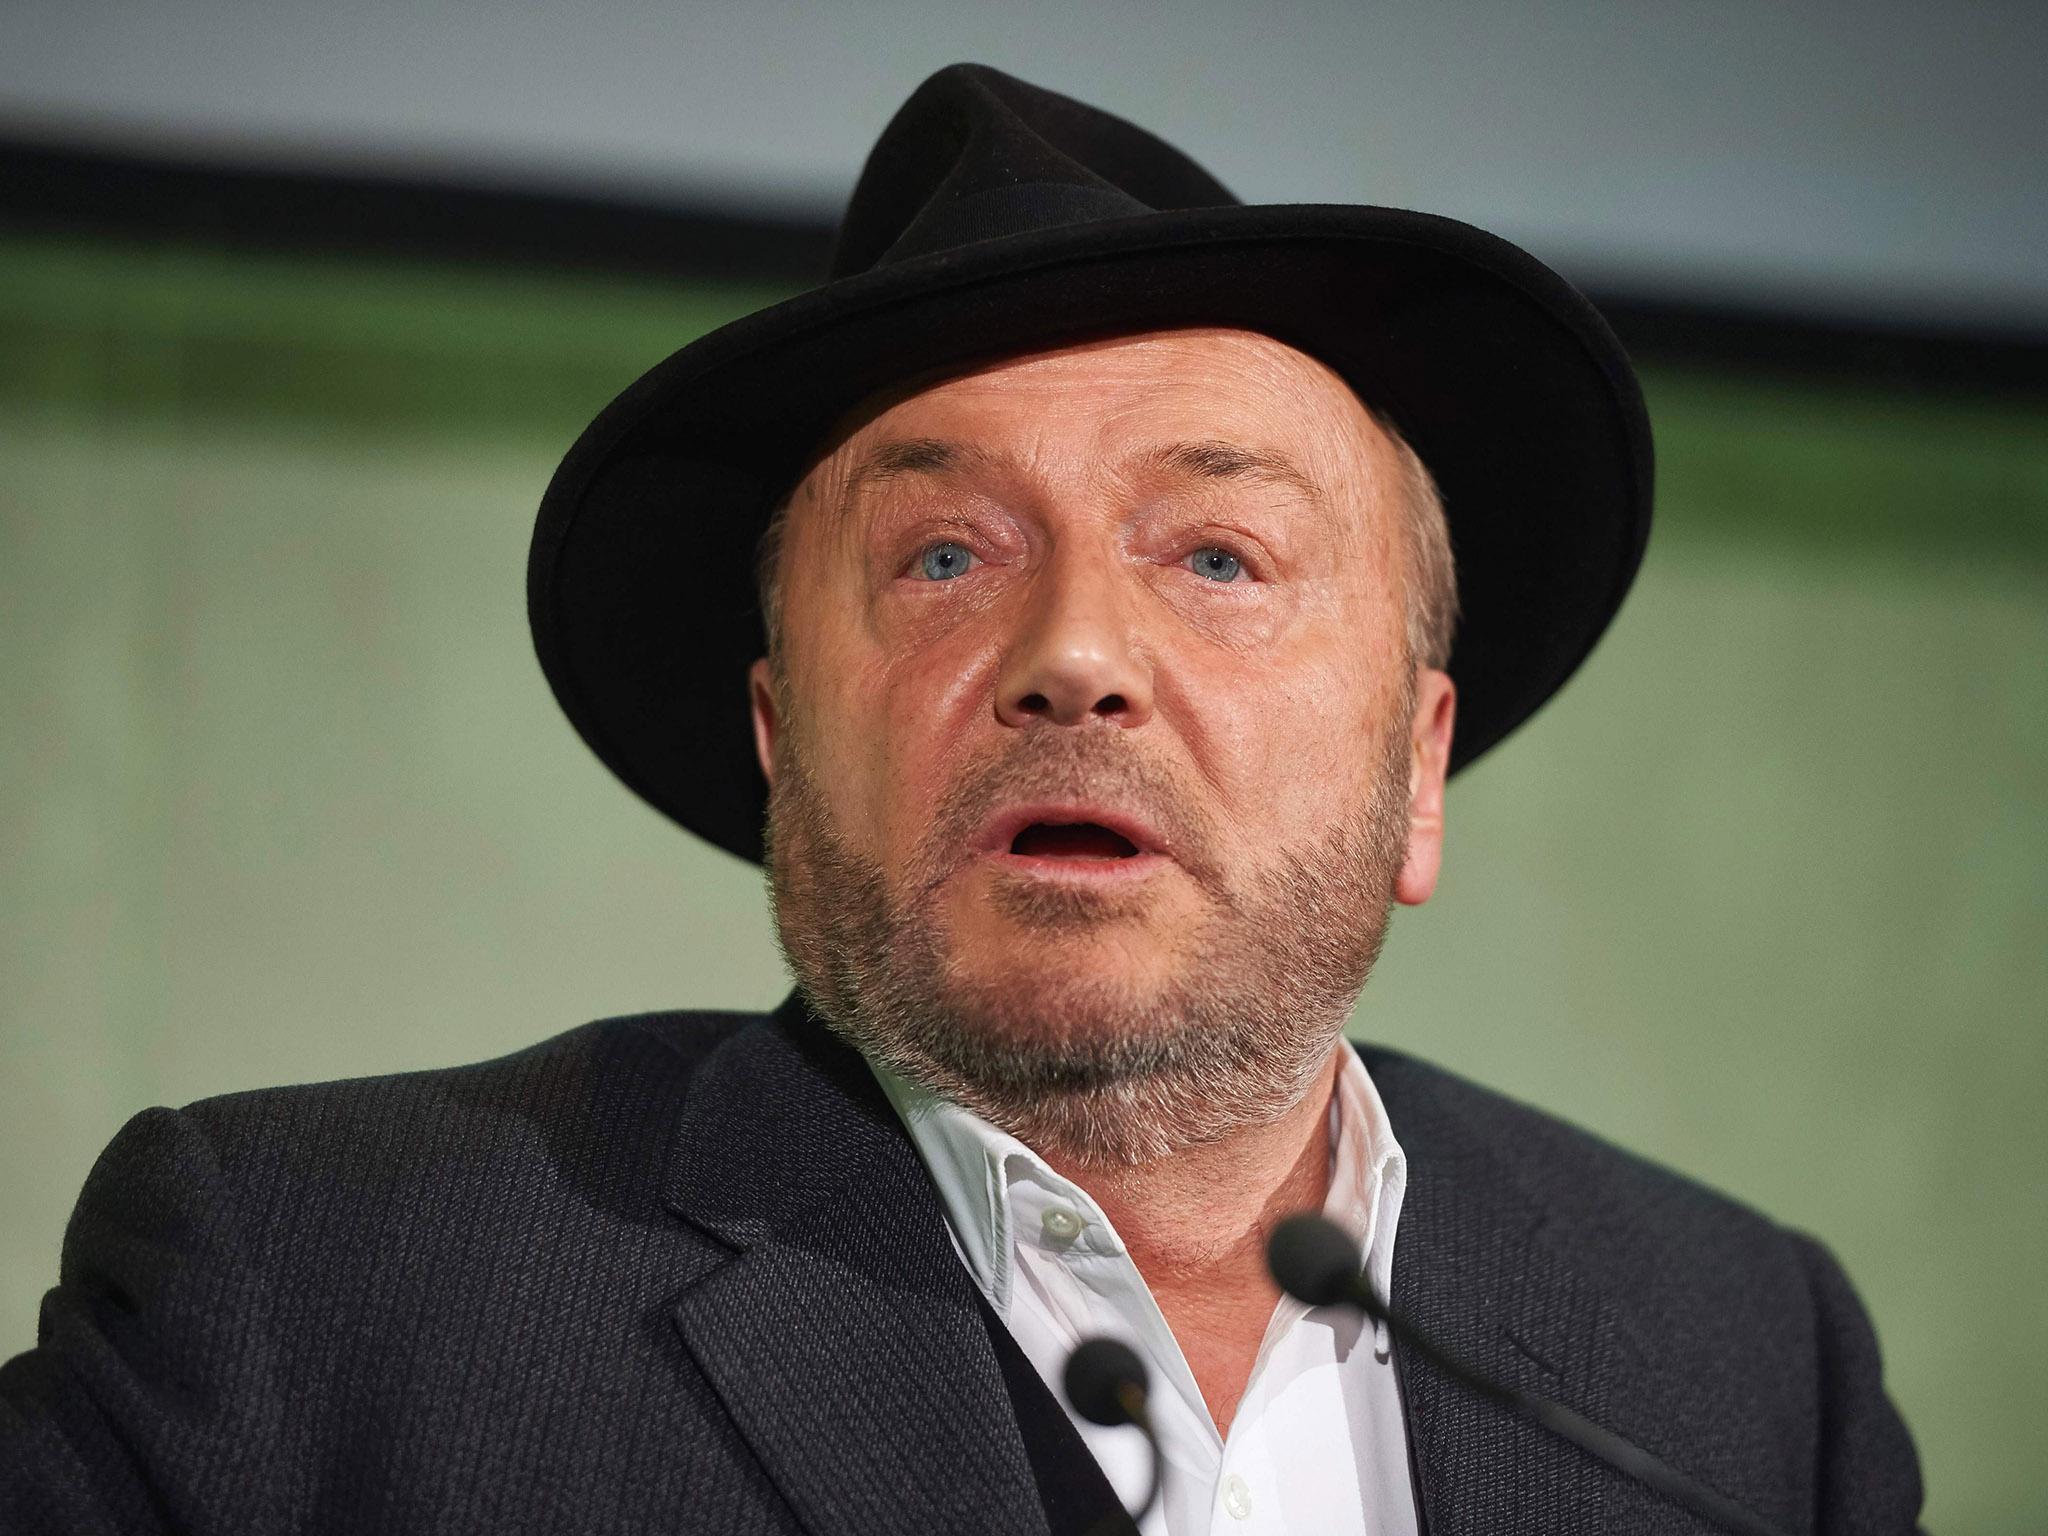 Galloway says he sold his house to fund the film